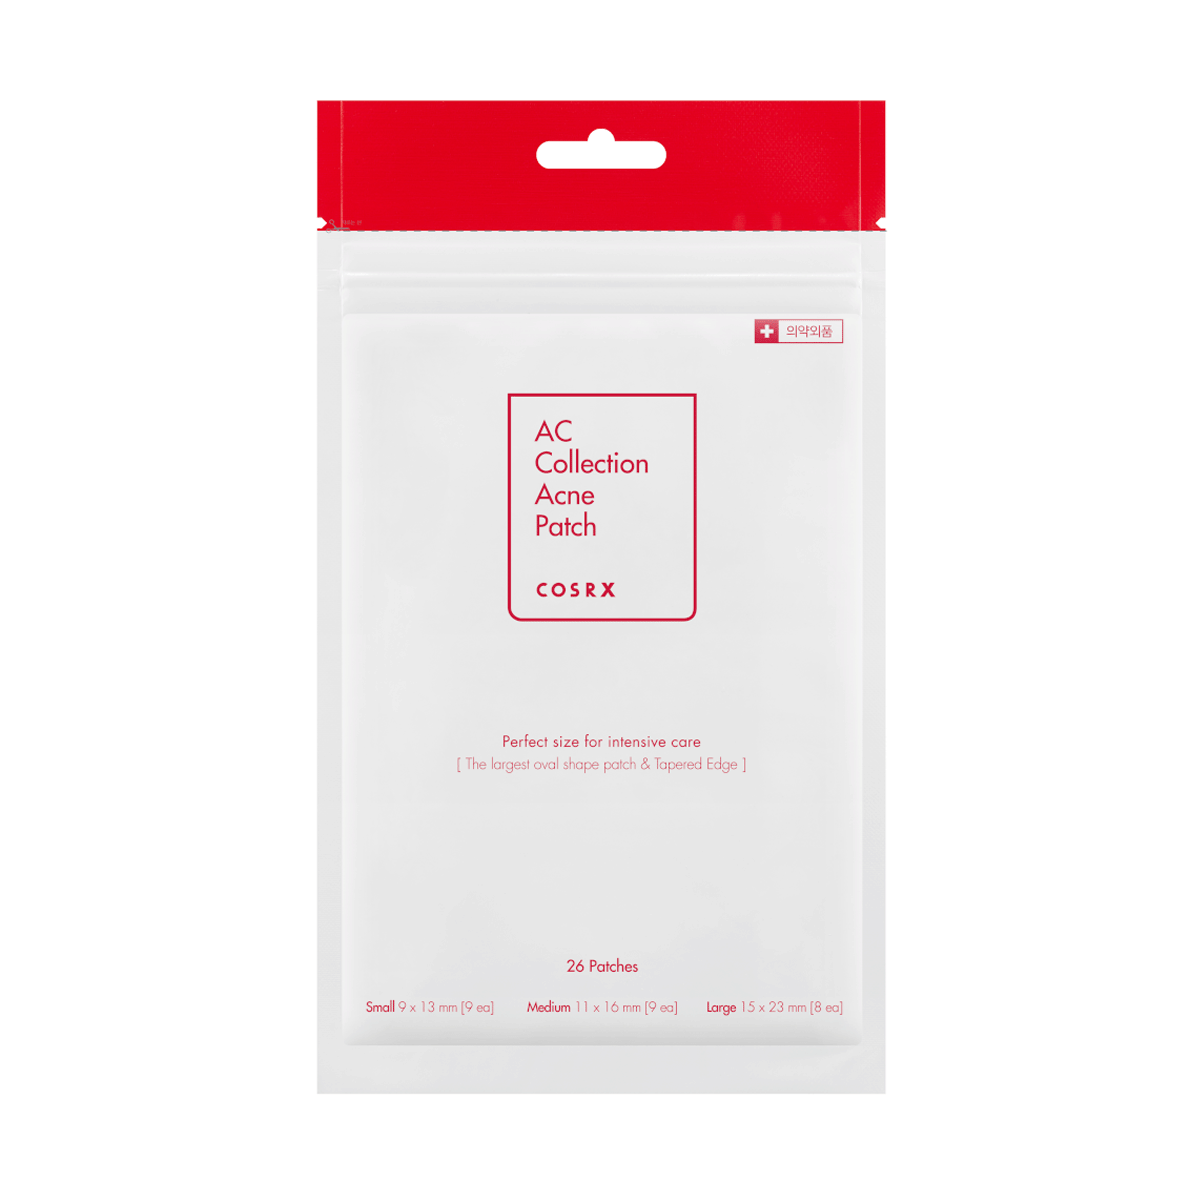 AC Collection Acne Patch 26 Patches